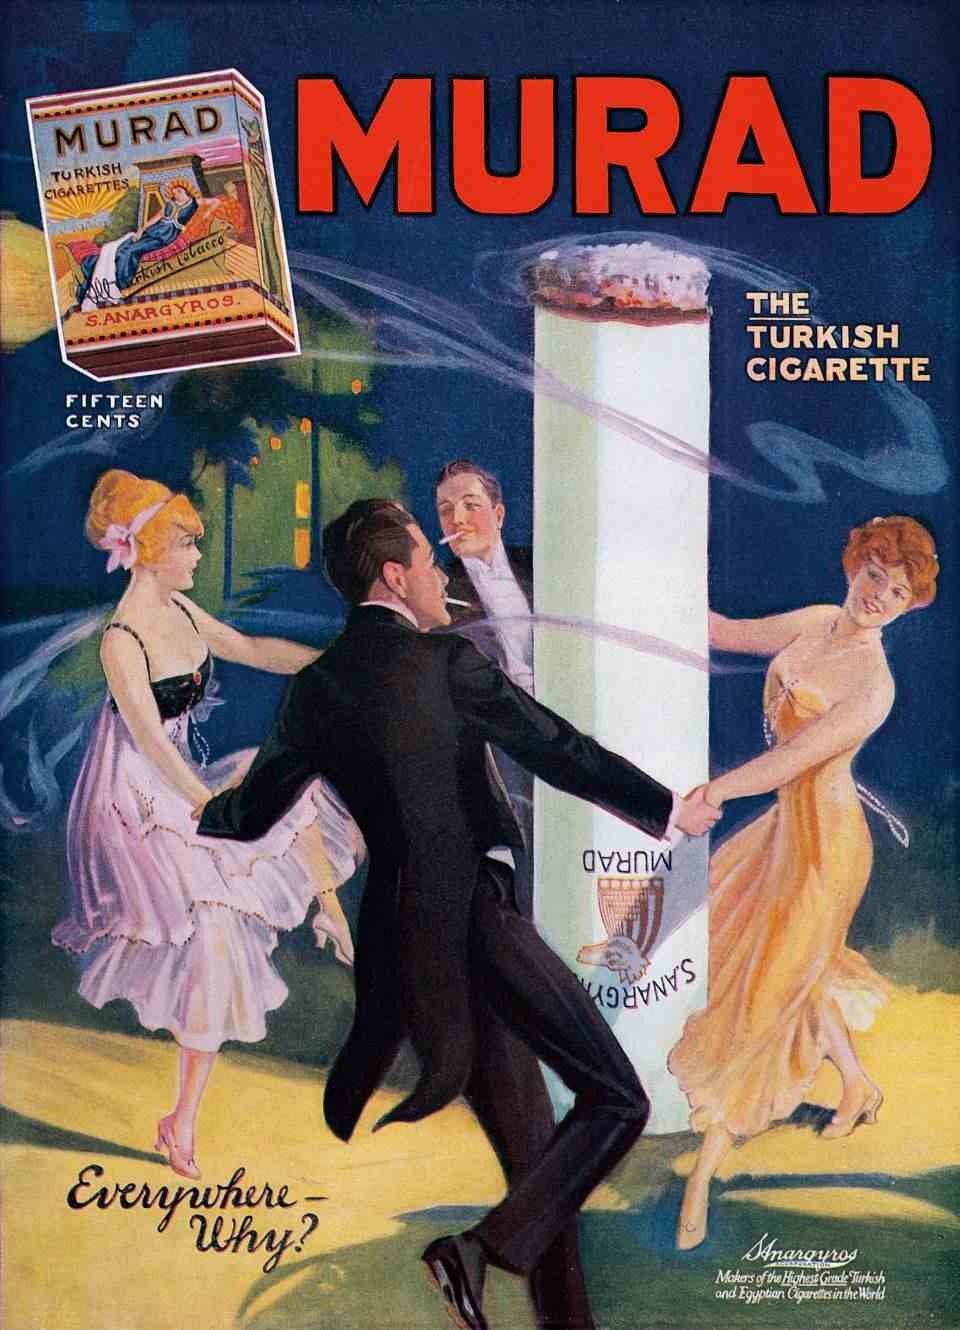 Jim Heiman.  Alcohol and Tobacco Advertising in the 20th Century